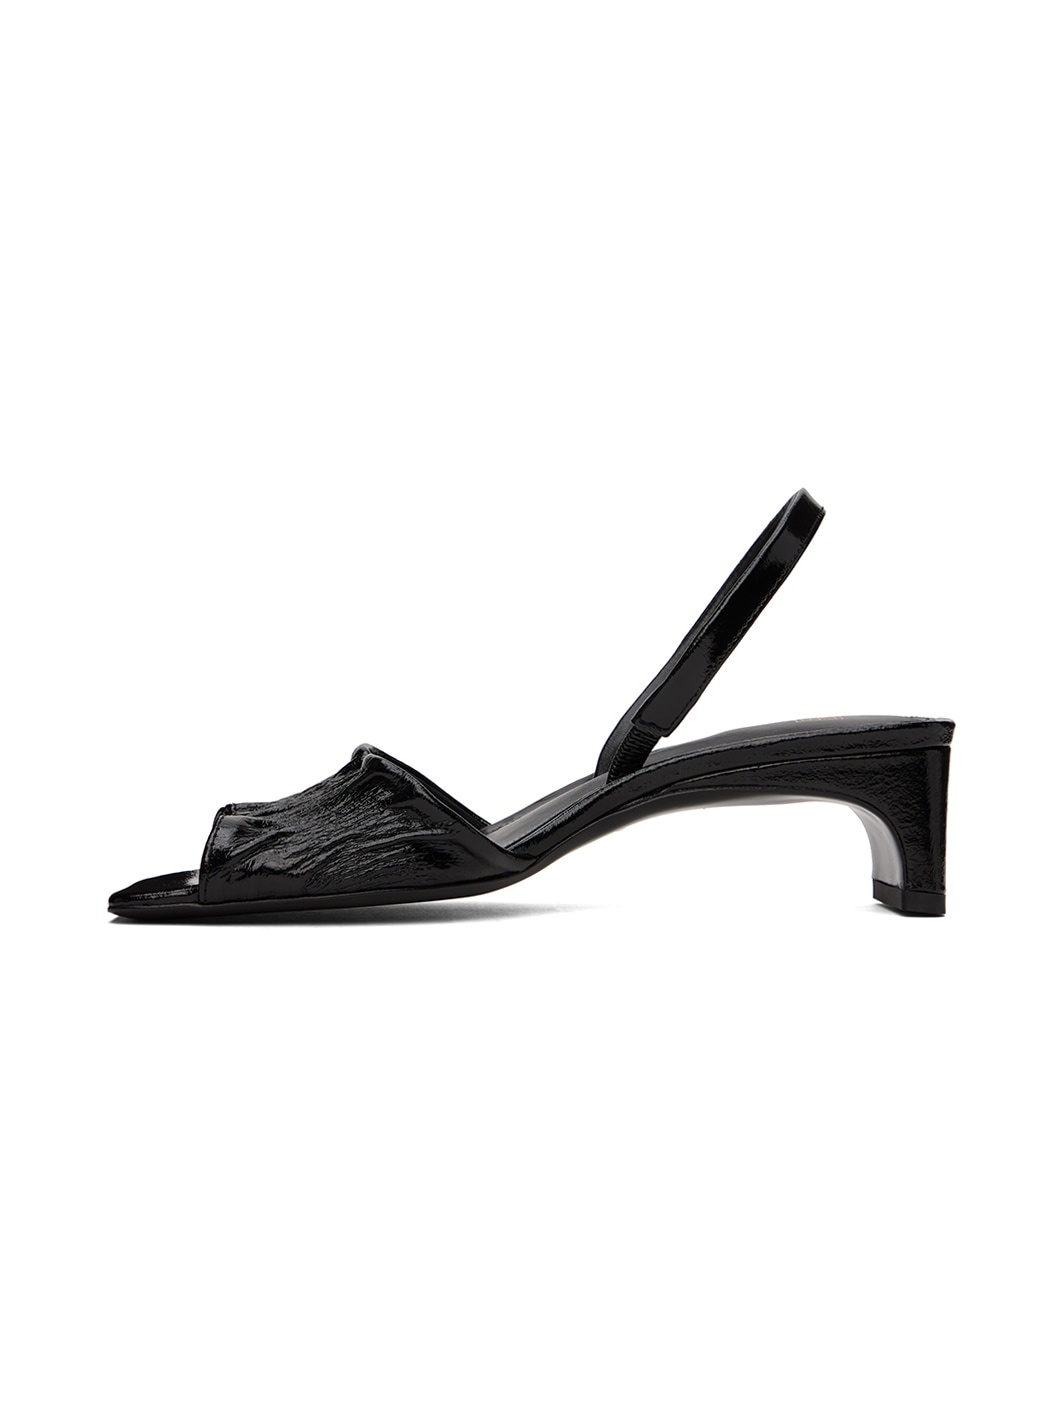 Black 'The Gathered Scoop' Heeled Sandals - 3